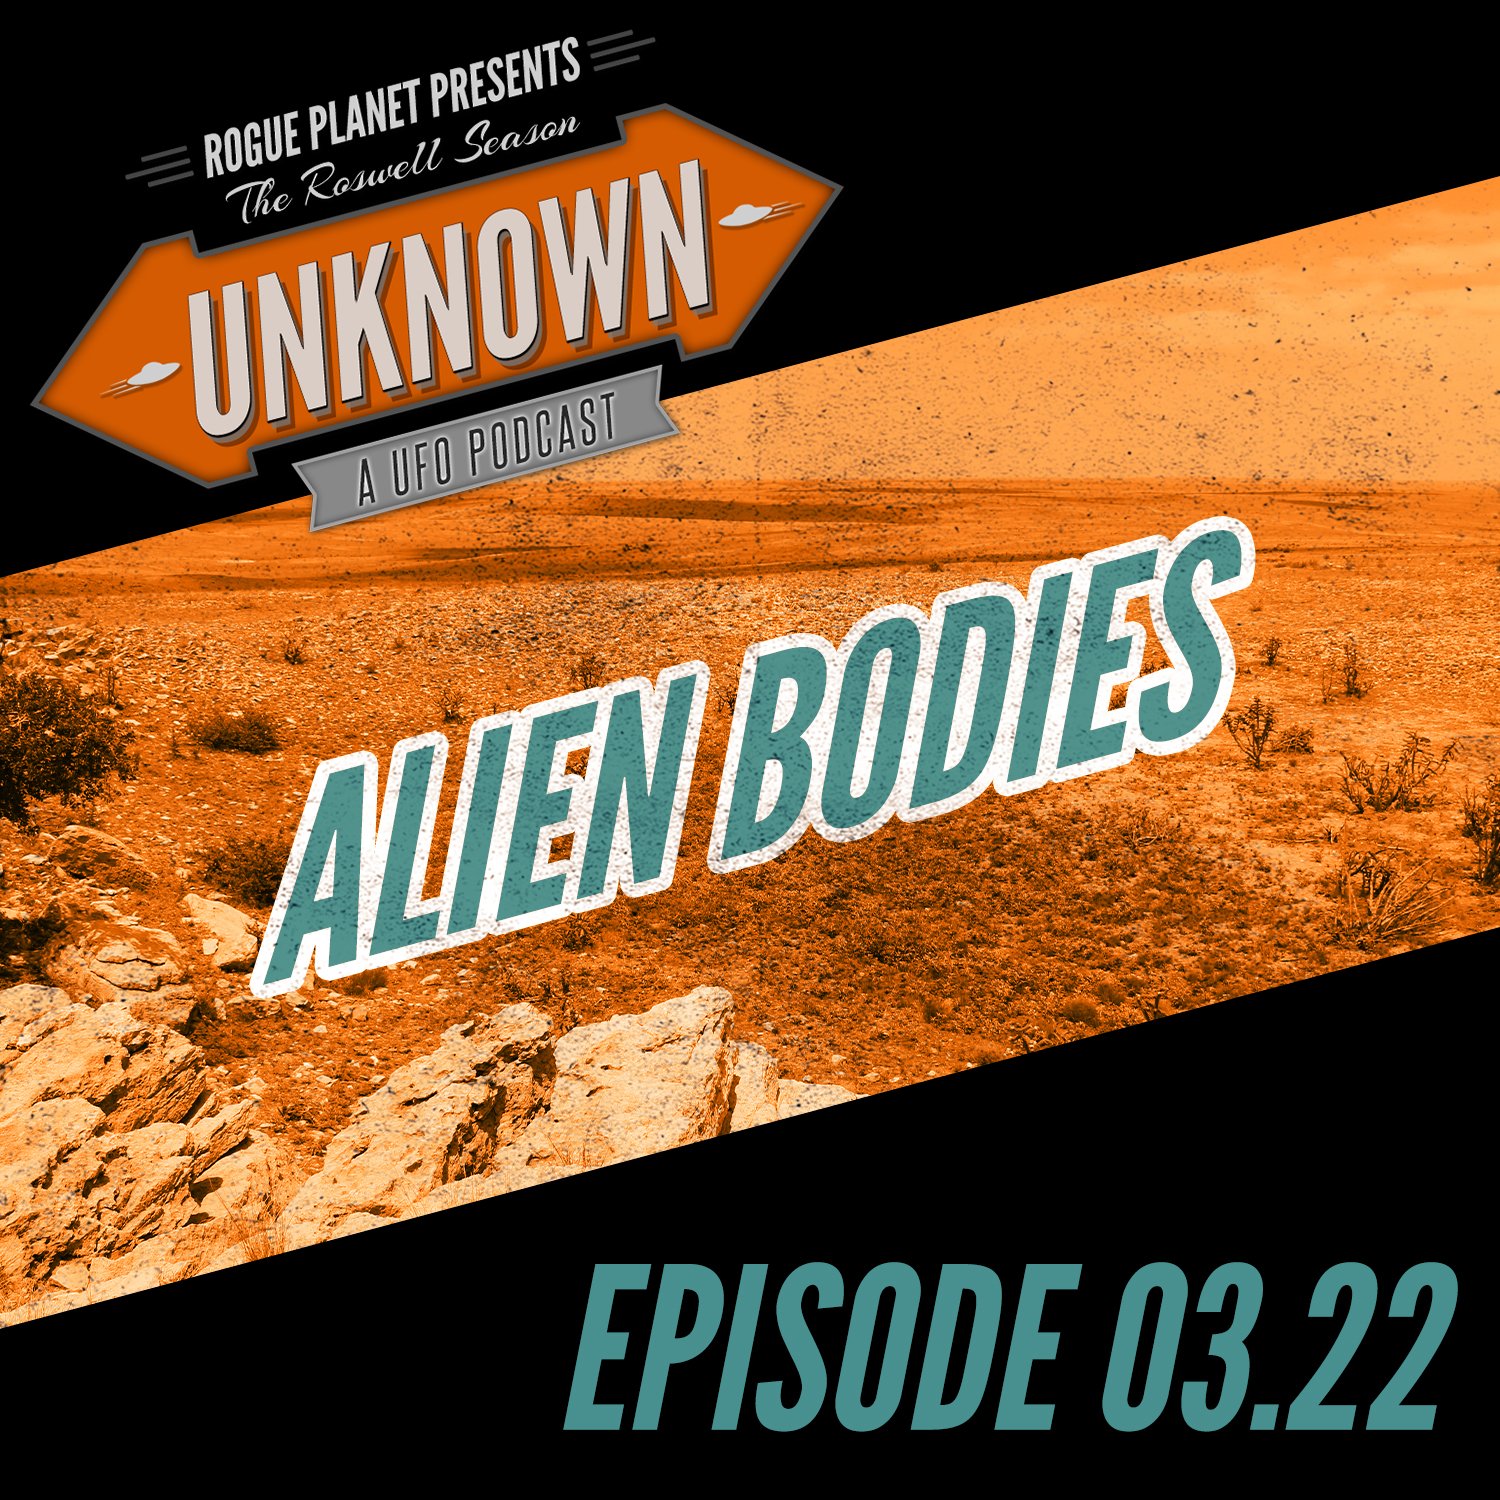 Artwork for podcast UNKNOWN — a UFO podcast